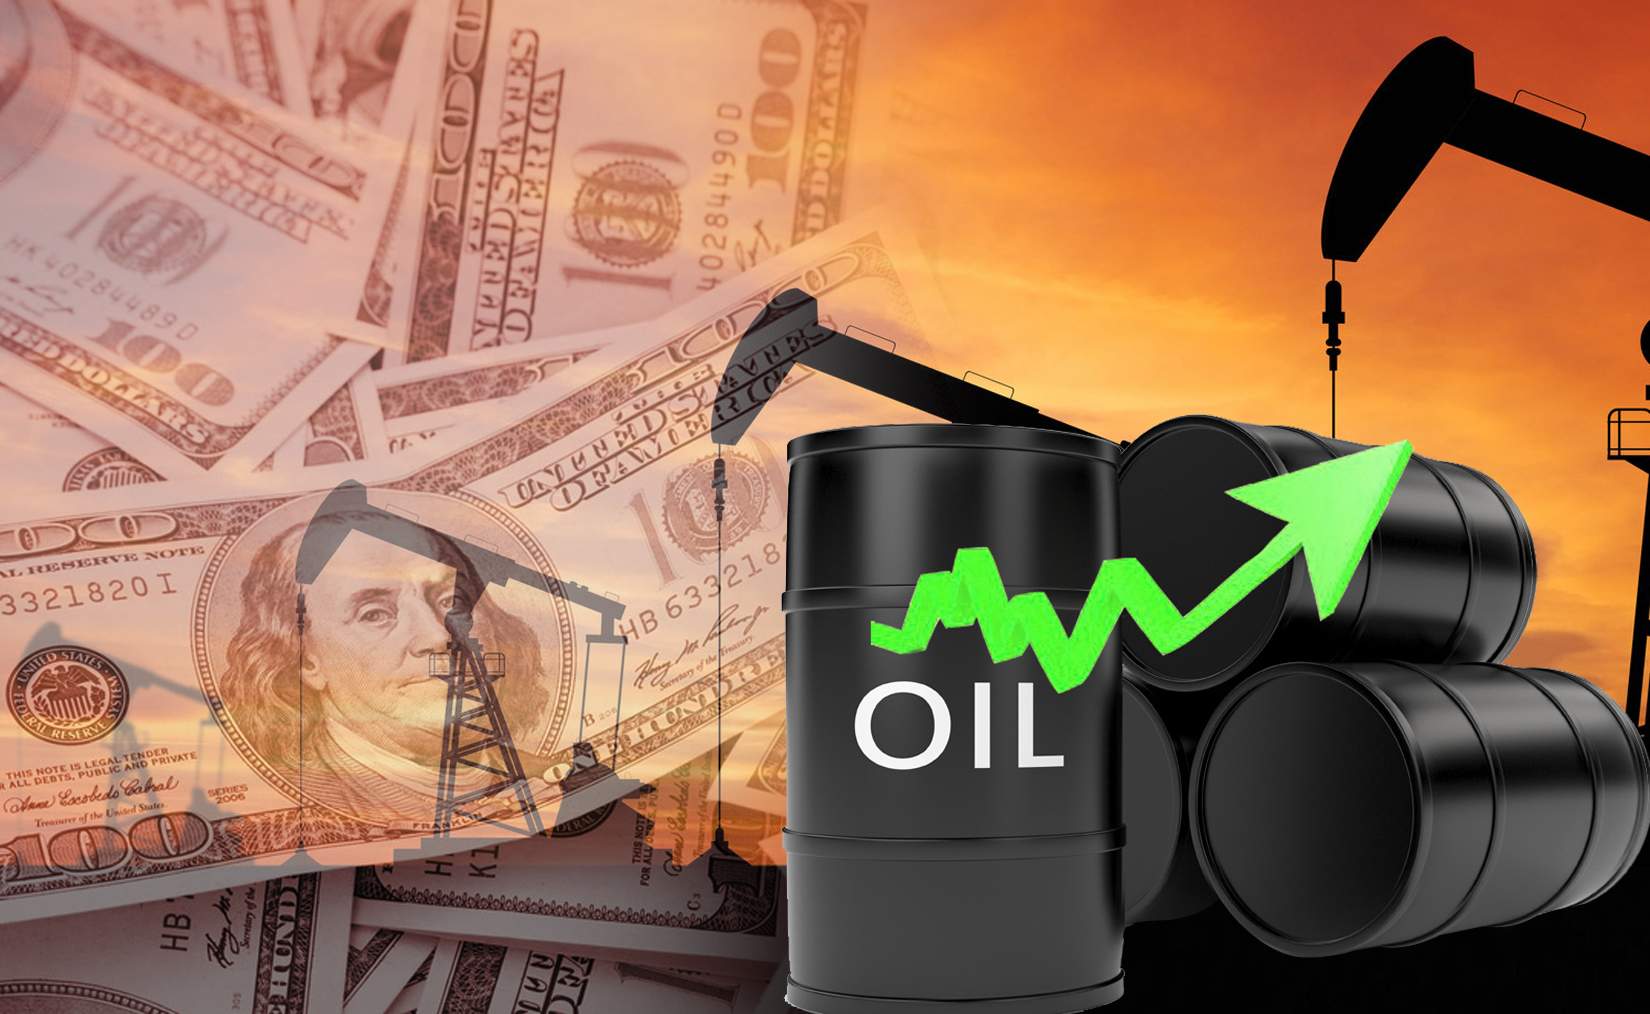 Kuwait oil price up 9 cents to USD 41.36 pb                                                                                                                                                                                                               